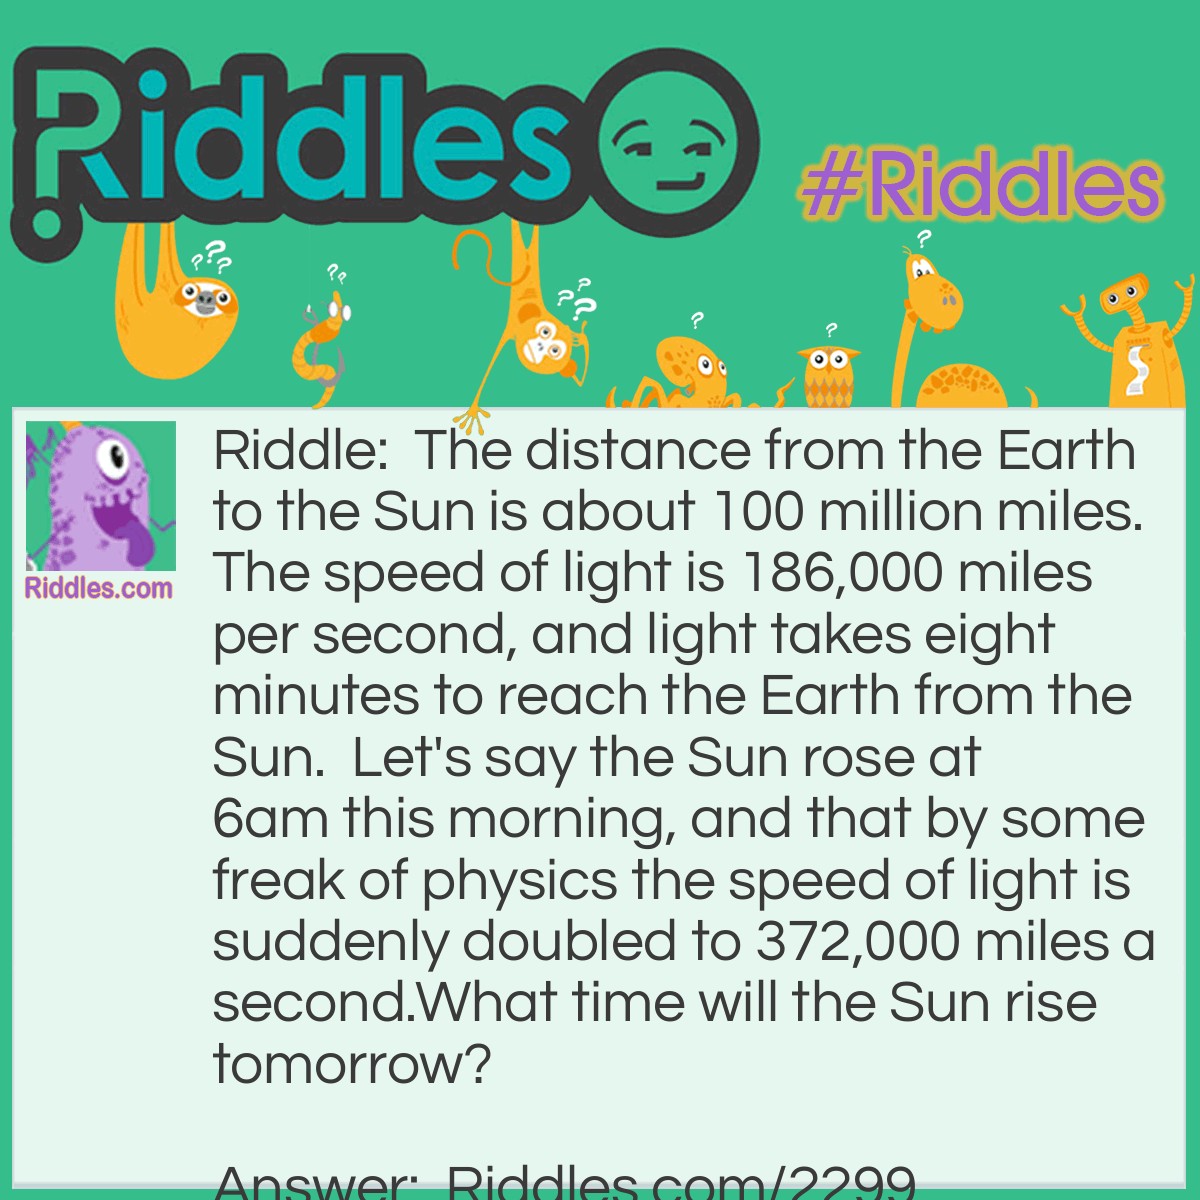 Riddle: The distance from the Earth to the Sun is about 100 million miles. The speed of light is 186,000 miles per second, and light takes eight minutes to reach the Earth from the Sun.  Let's say the Sun rose at 6am this morning, and that by some freak of physics the speed of light is suddenly doubled to 372,000 miles a second.
What time will the Sun rise tomorrow? Answer: 6am again. After all, what diffrence does the speed of light make to the answer?  It's irrelevant- only the speed of the roation of the Earth matters here.  